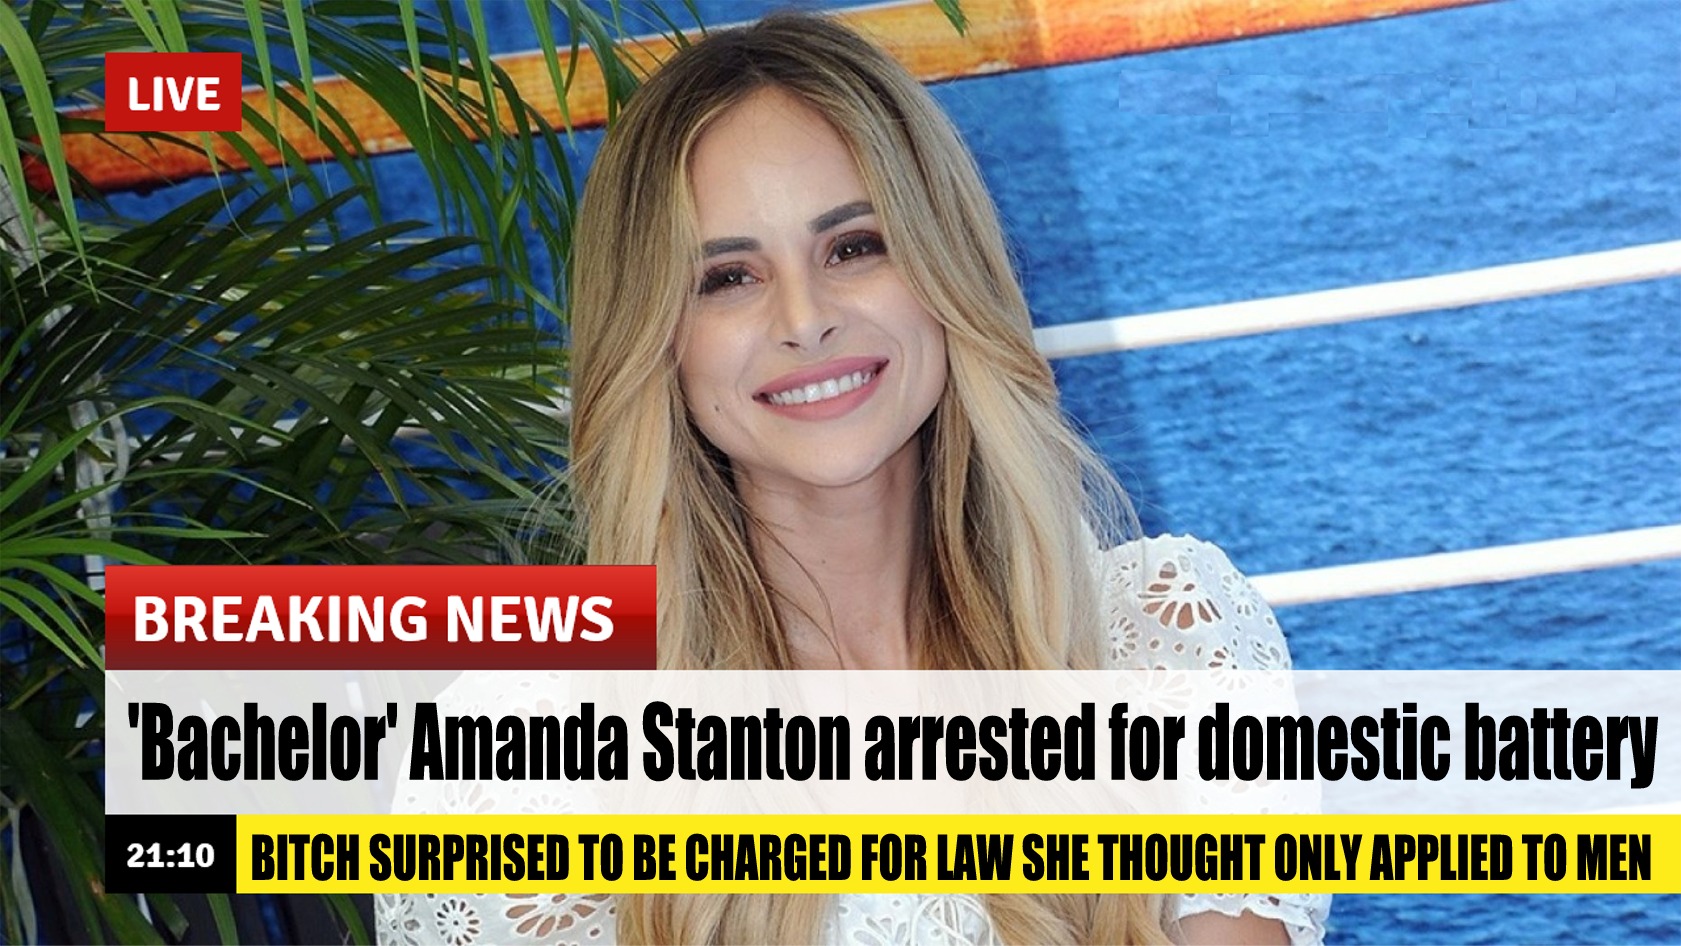 amanda stanton bachelor - Live Breaking News 'Bachelor'Amanda Stanton arrested for domestic battery Bitch Surprised To Be Charged For Law She Thought Only Applied To Men